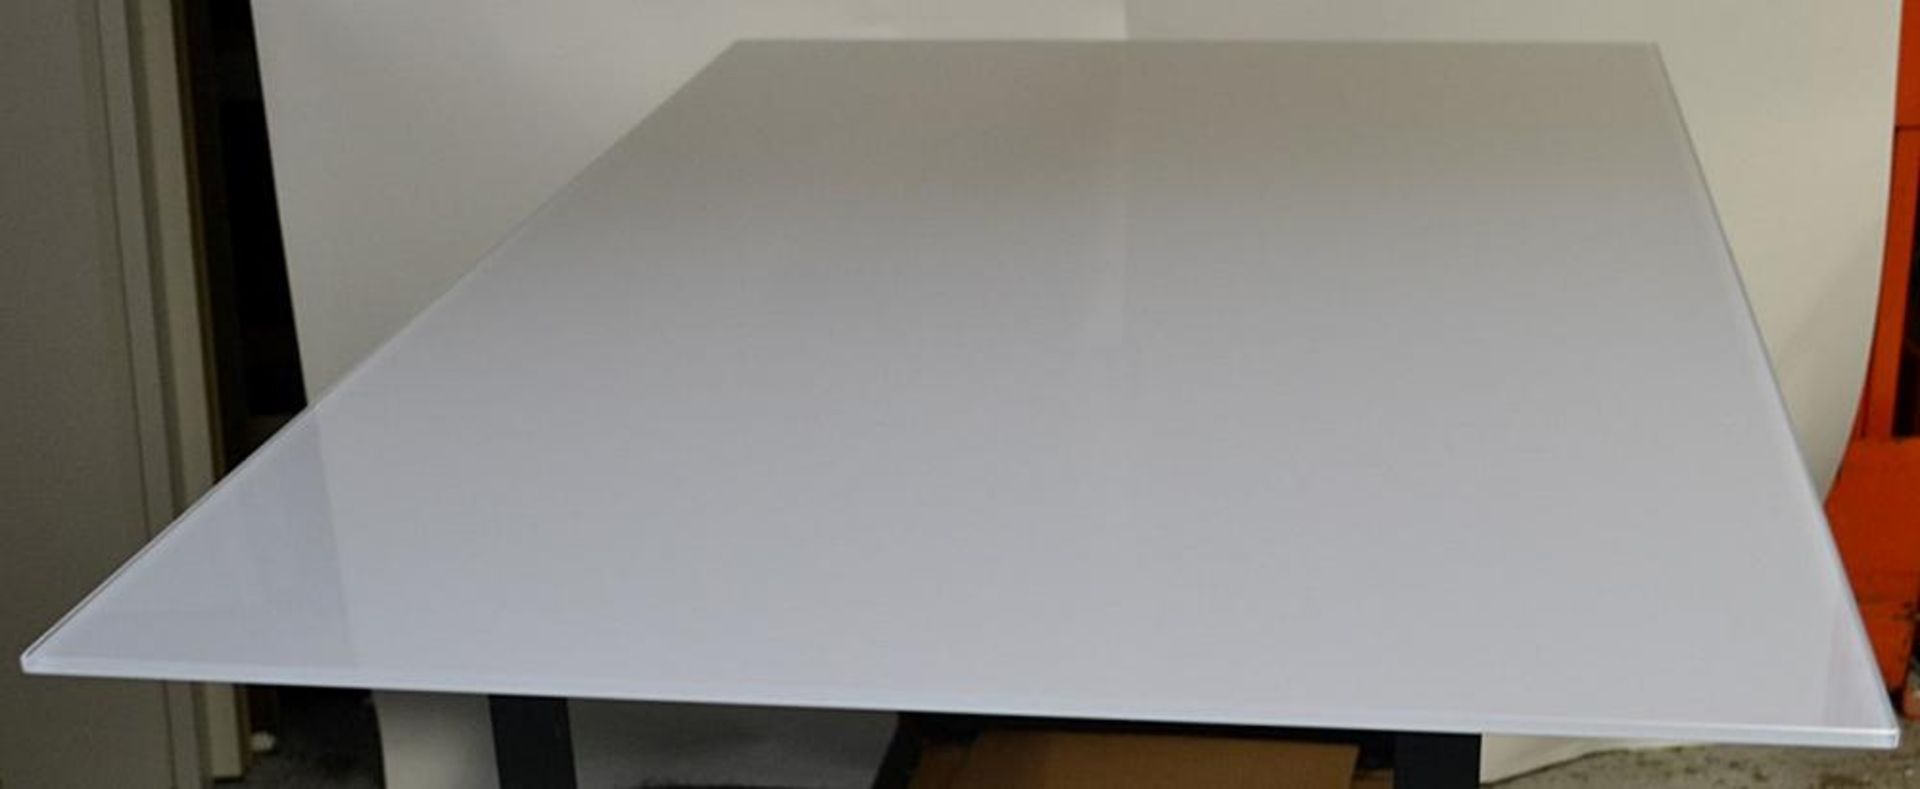 1 x LIGNE ROSET Plate Glass Table Top In Clay Grey - Dimensions: 150 x 95cm - &nbsp;Glass Thickness: